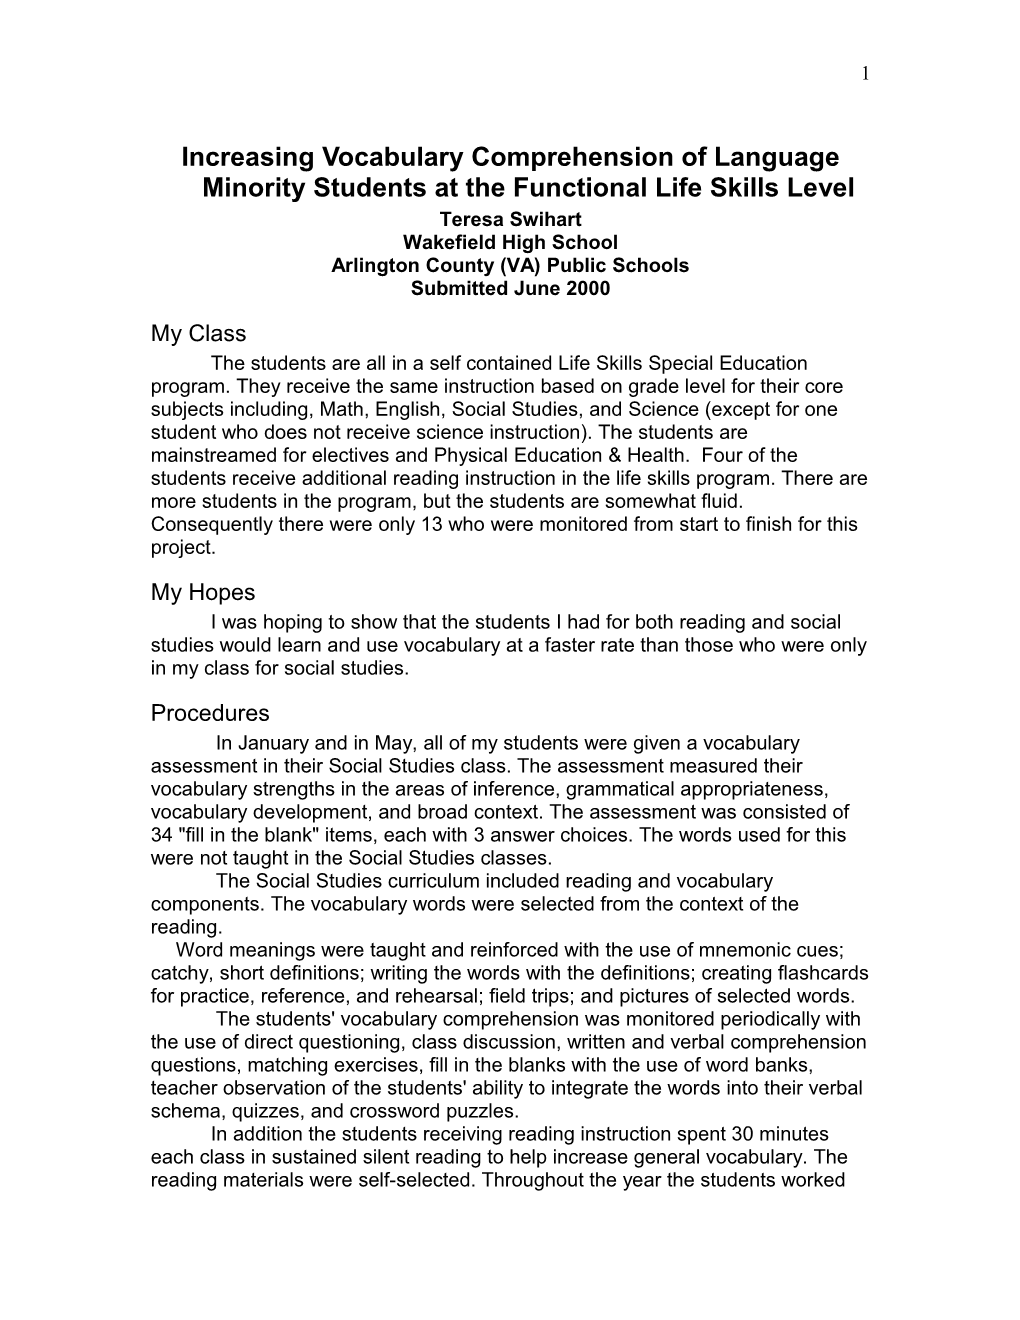 Increasing Vocabulary Comprehension of Language Minority Students at the Functional Life